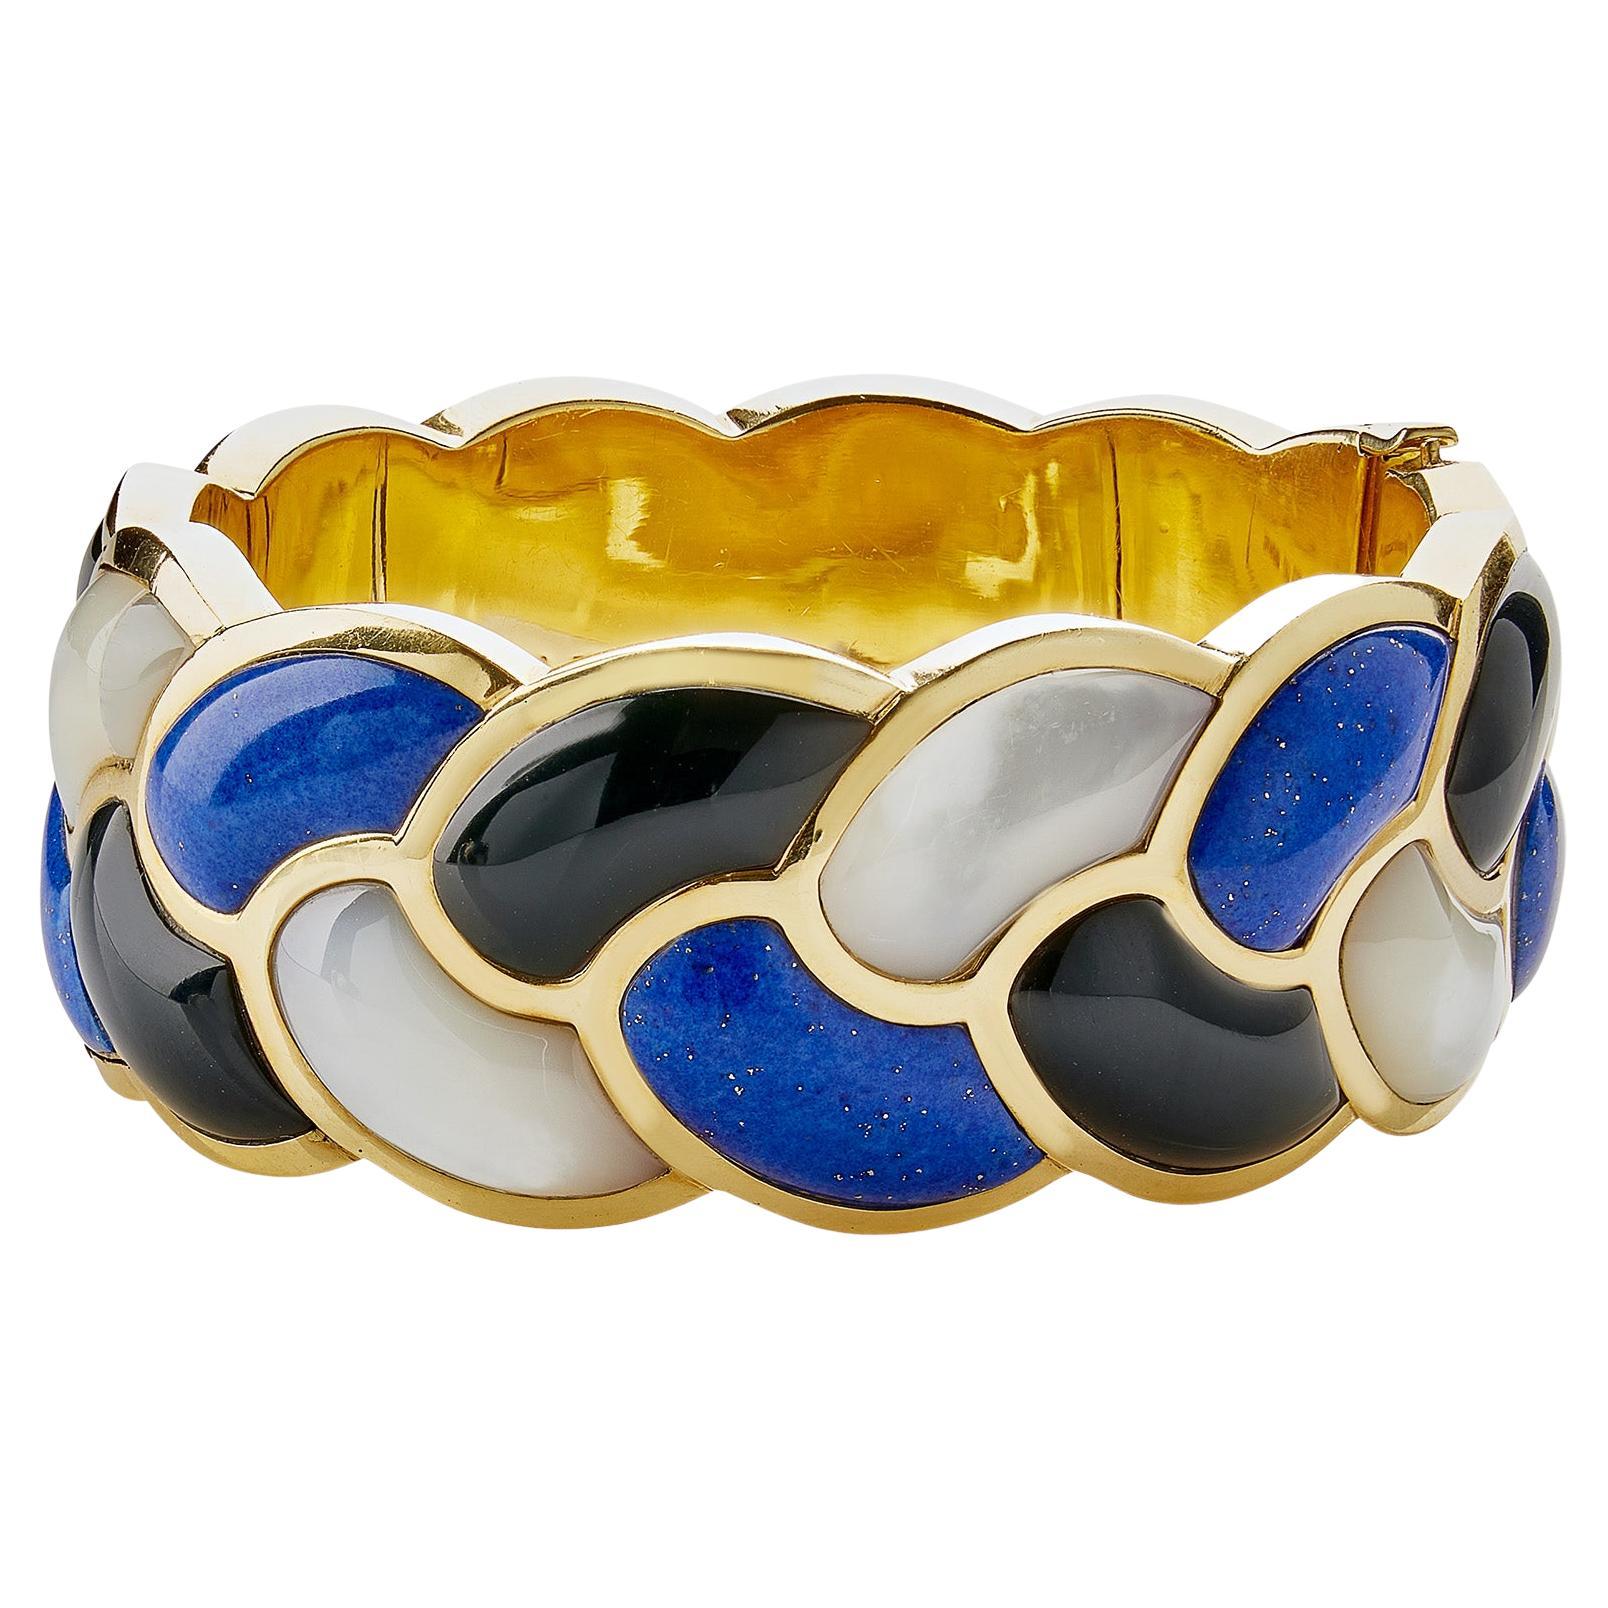 Tiffany & Co. Lapis, Black Jade and Mother-of-Pearl "Rope" Bangle Bracelet For Sale